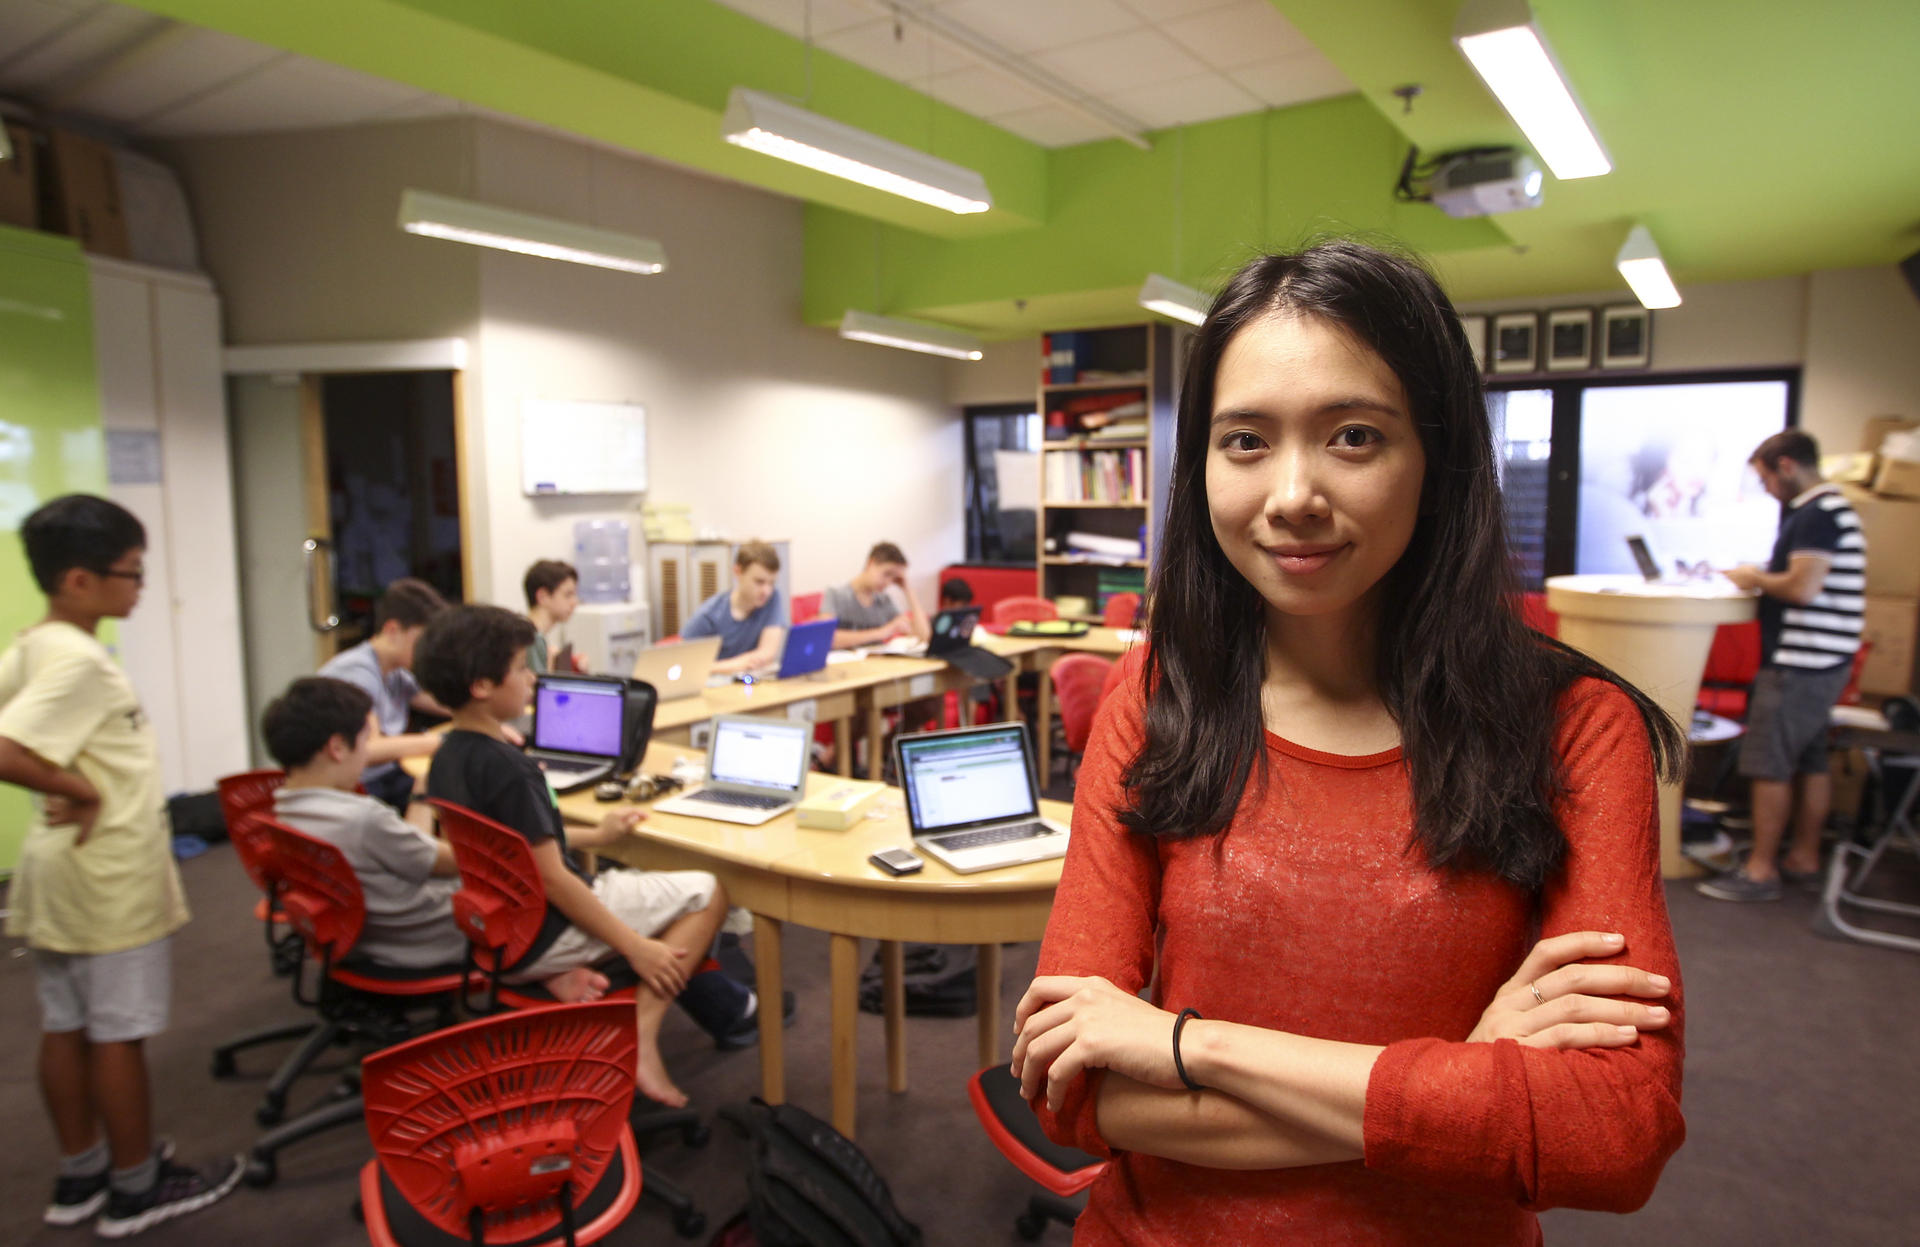 First Code Academy founder Michelle Sun believes girls should start young in science and tech. Photo: Jonathan Wong